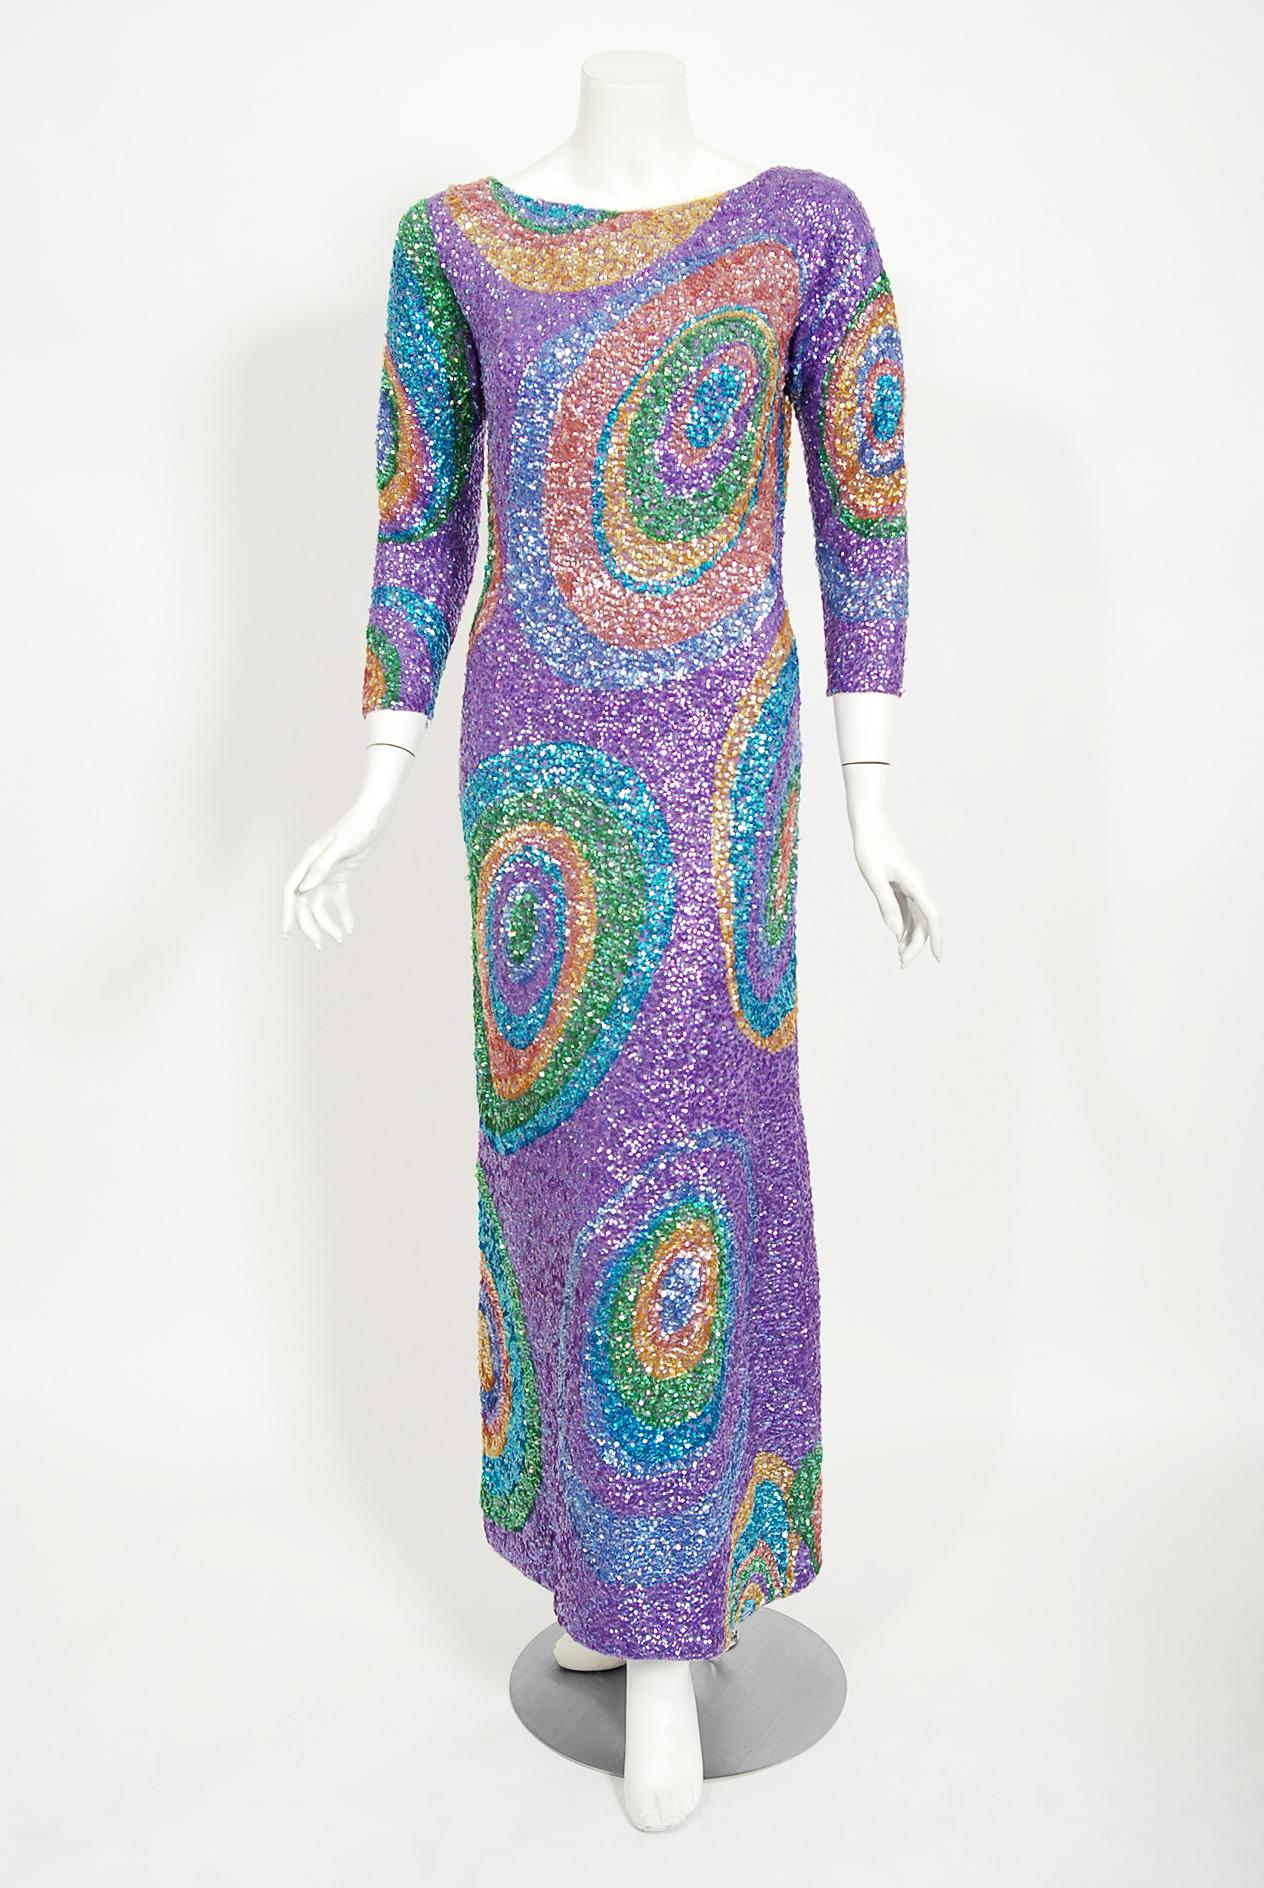 Mid-century Gene Shelly designer garments are in a class of their own. They are always fully-sequined by hand and fit to flatter the figure. This early 1960's treasure has a fantastic graphic atomic swirl design in the most beautiful colors. The